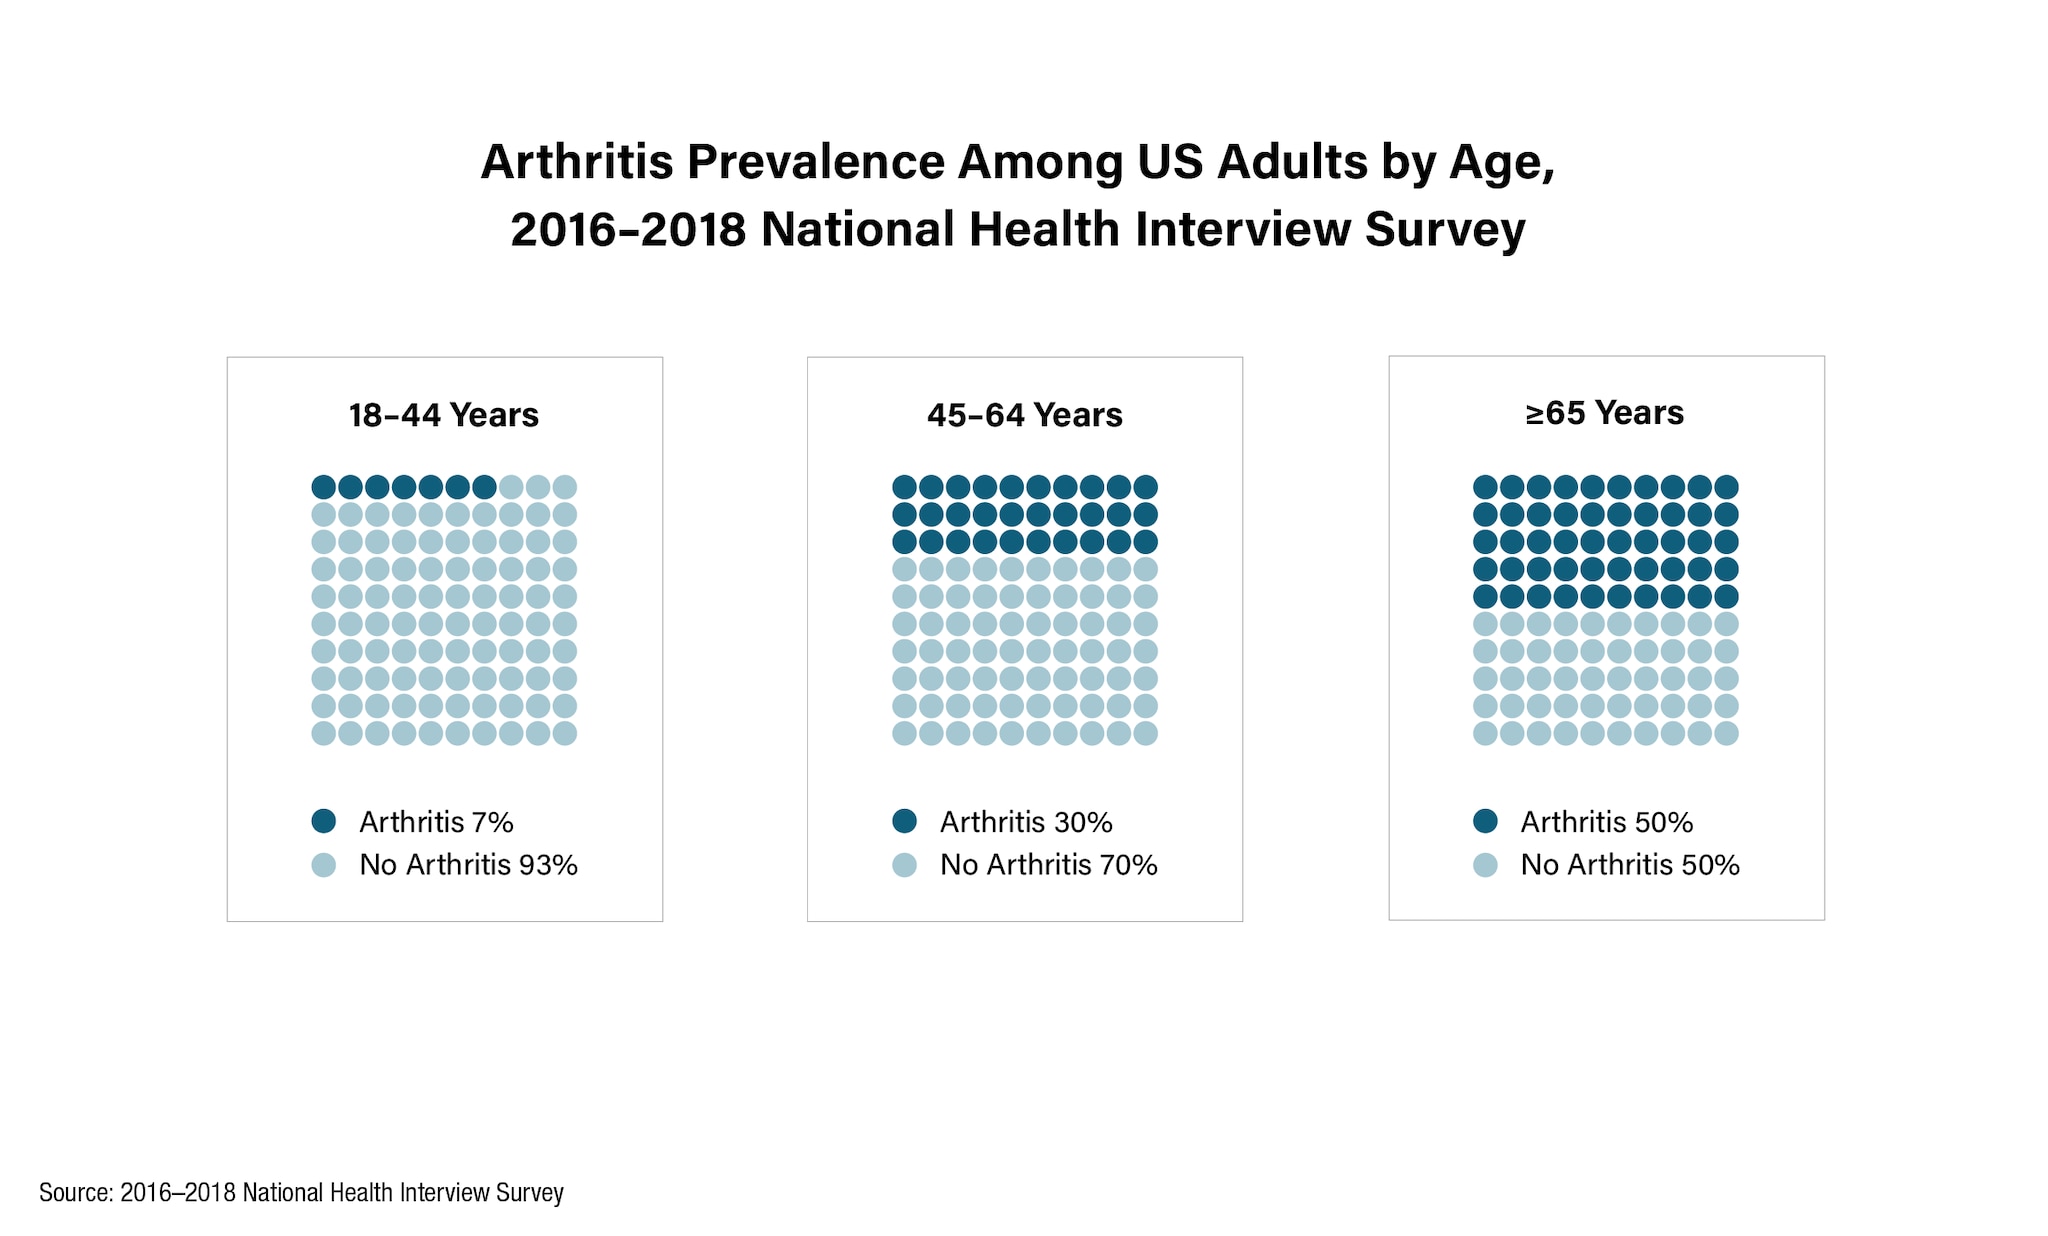 Arthritis Prevalence Among US Adults by Age, 2016-2018 National Health Interview Survey